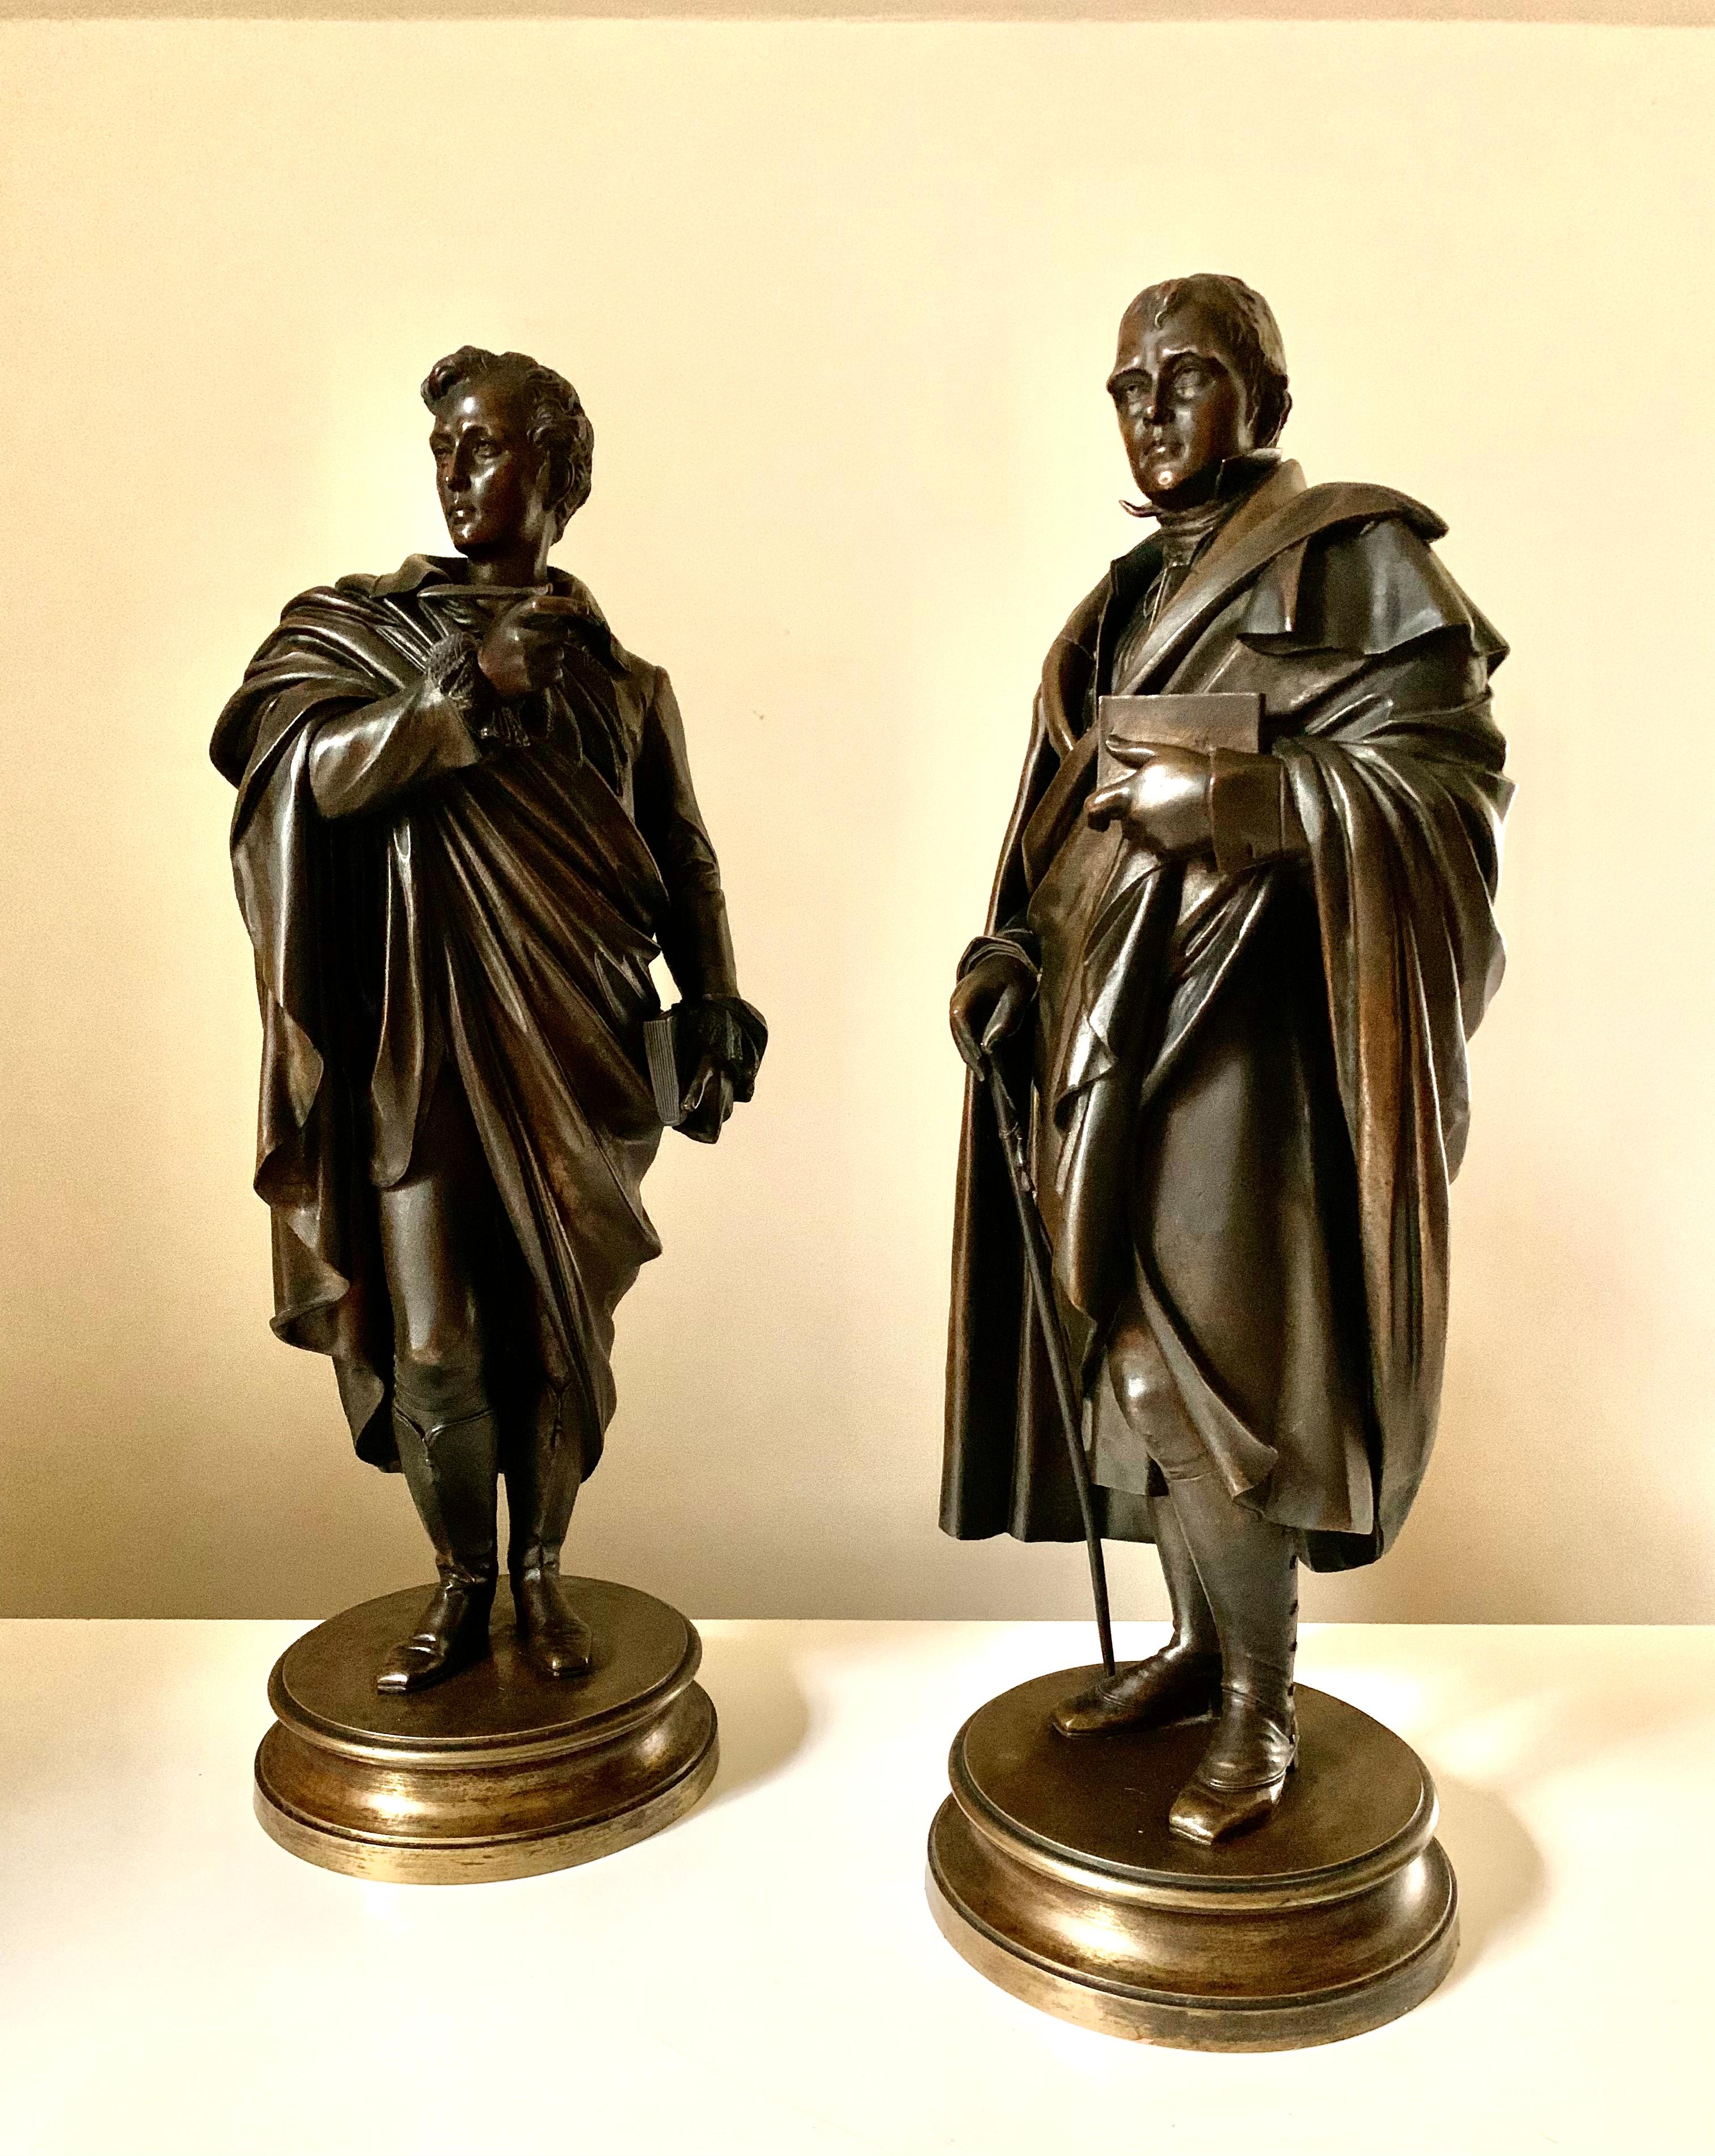 Scarce, full length patinated bronze sculptures depicting Lord Byron and Sir Walter Scott, two of the greatest literary Romantic period geniuses of the nineteenth century Great Britain.
Exceptionally detailed, Lord Byron is depicted holding a quill